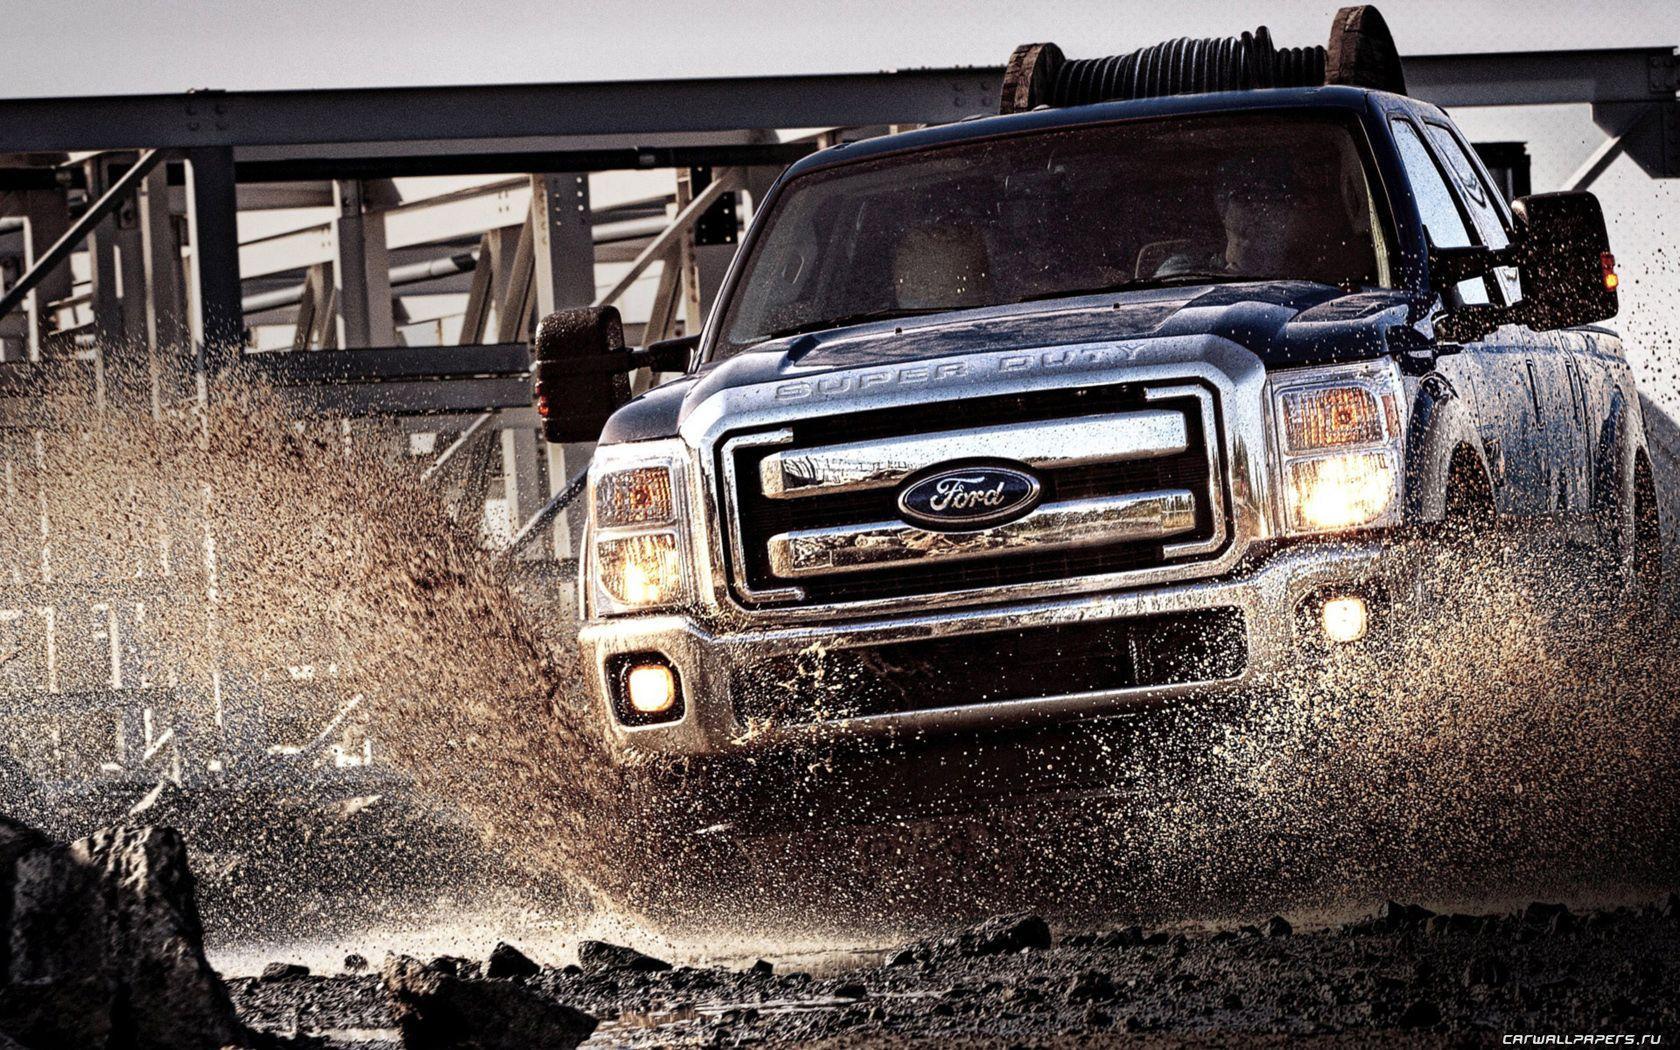 Ford F 350 Wallpapers Top Free Ford F 350 Backgrounds Wallpaperaccess